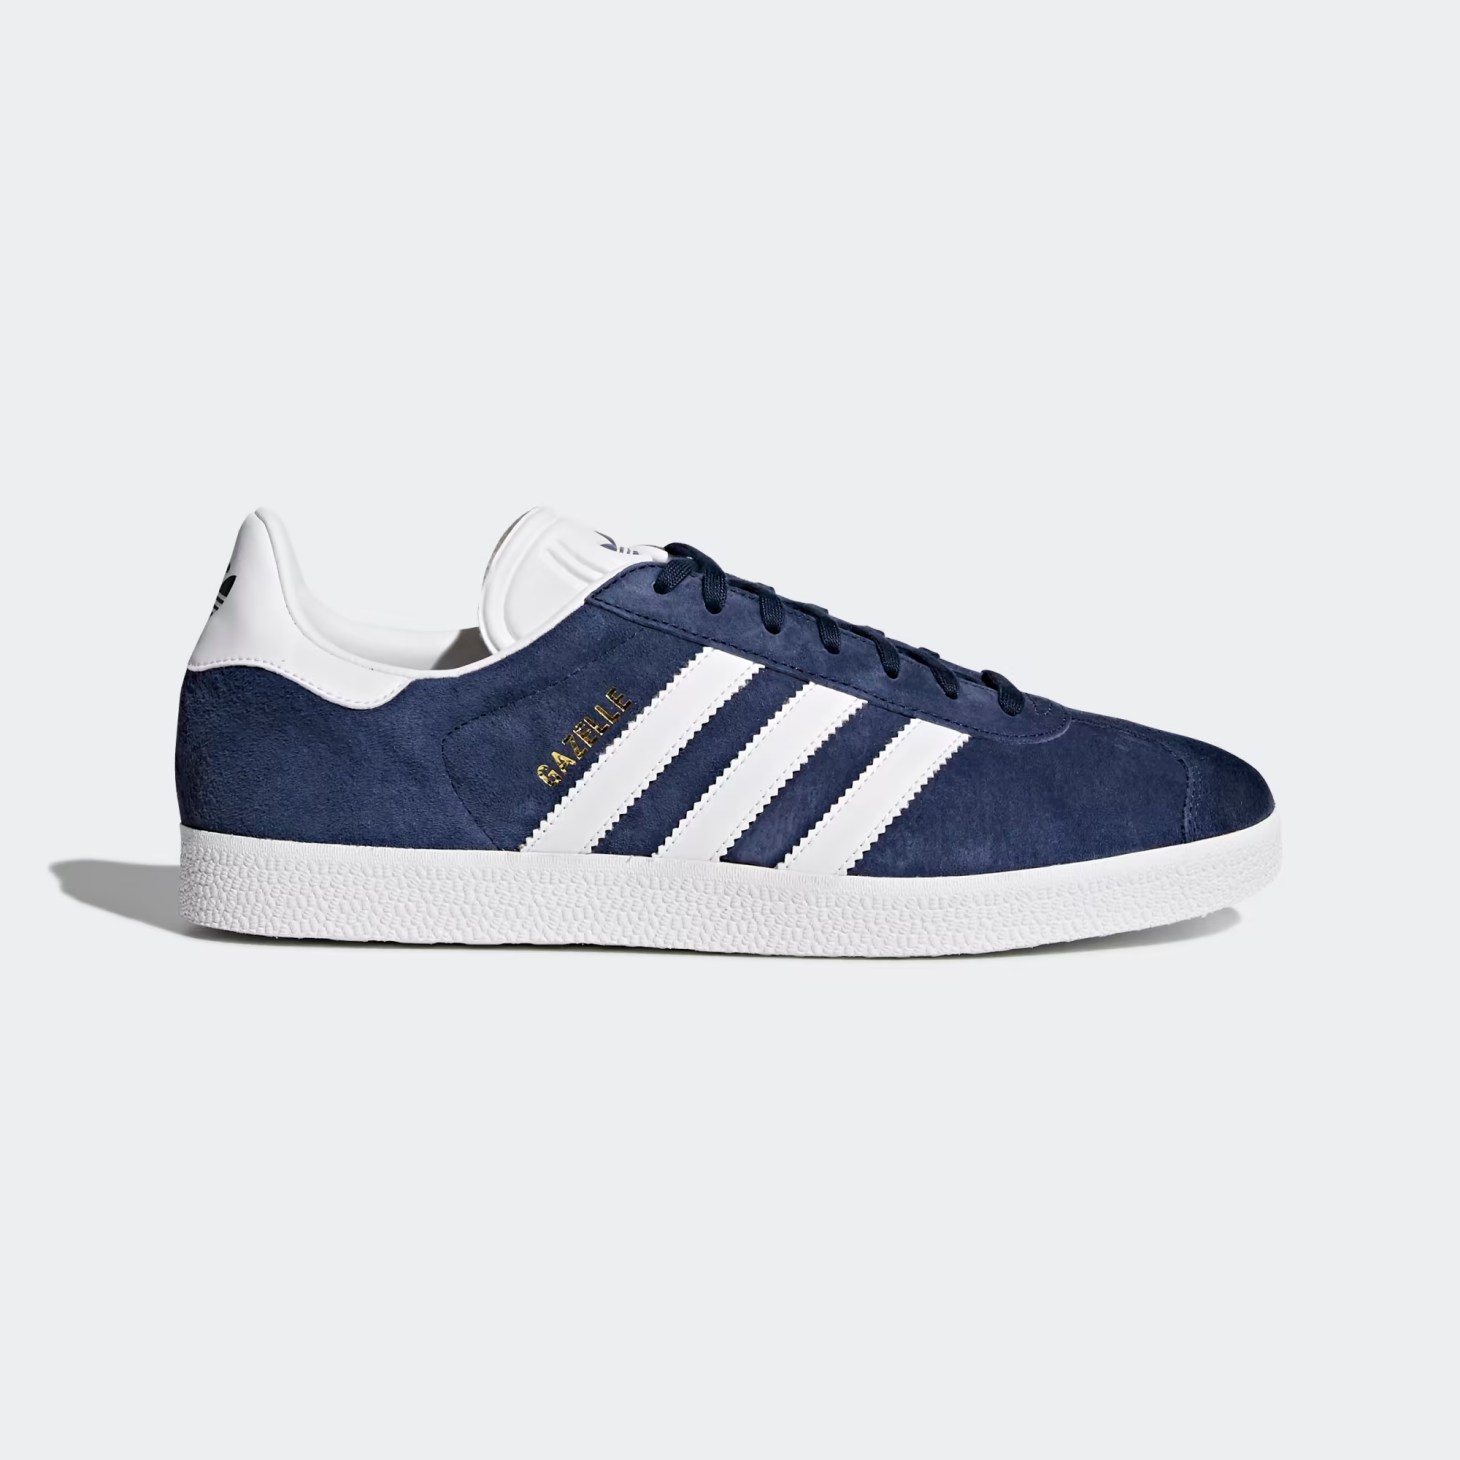 adidas gazelles, one of the best summer sneakers